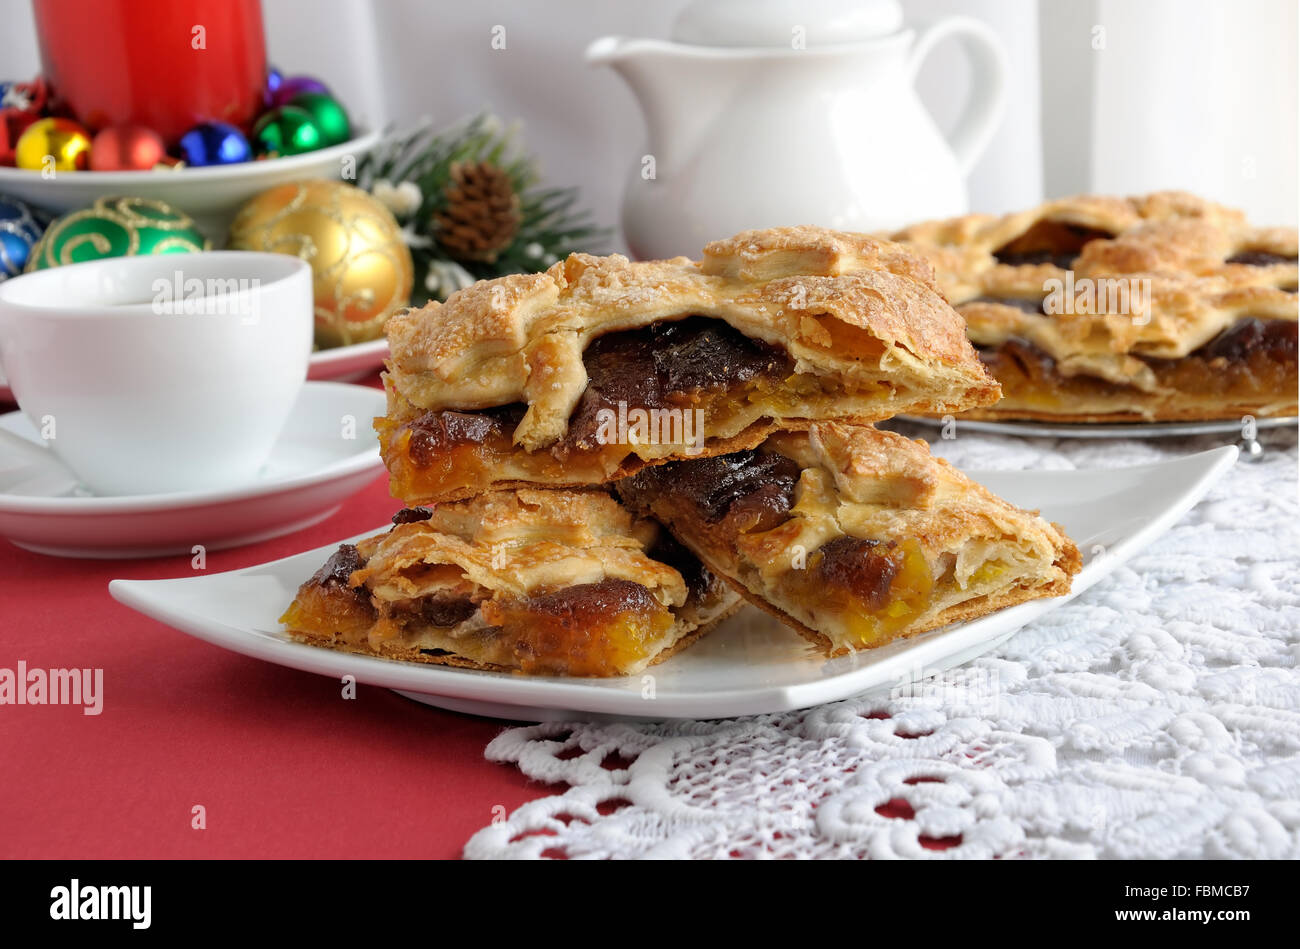 Pieces of strudel stuffed with apples and jam Stock Photo